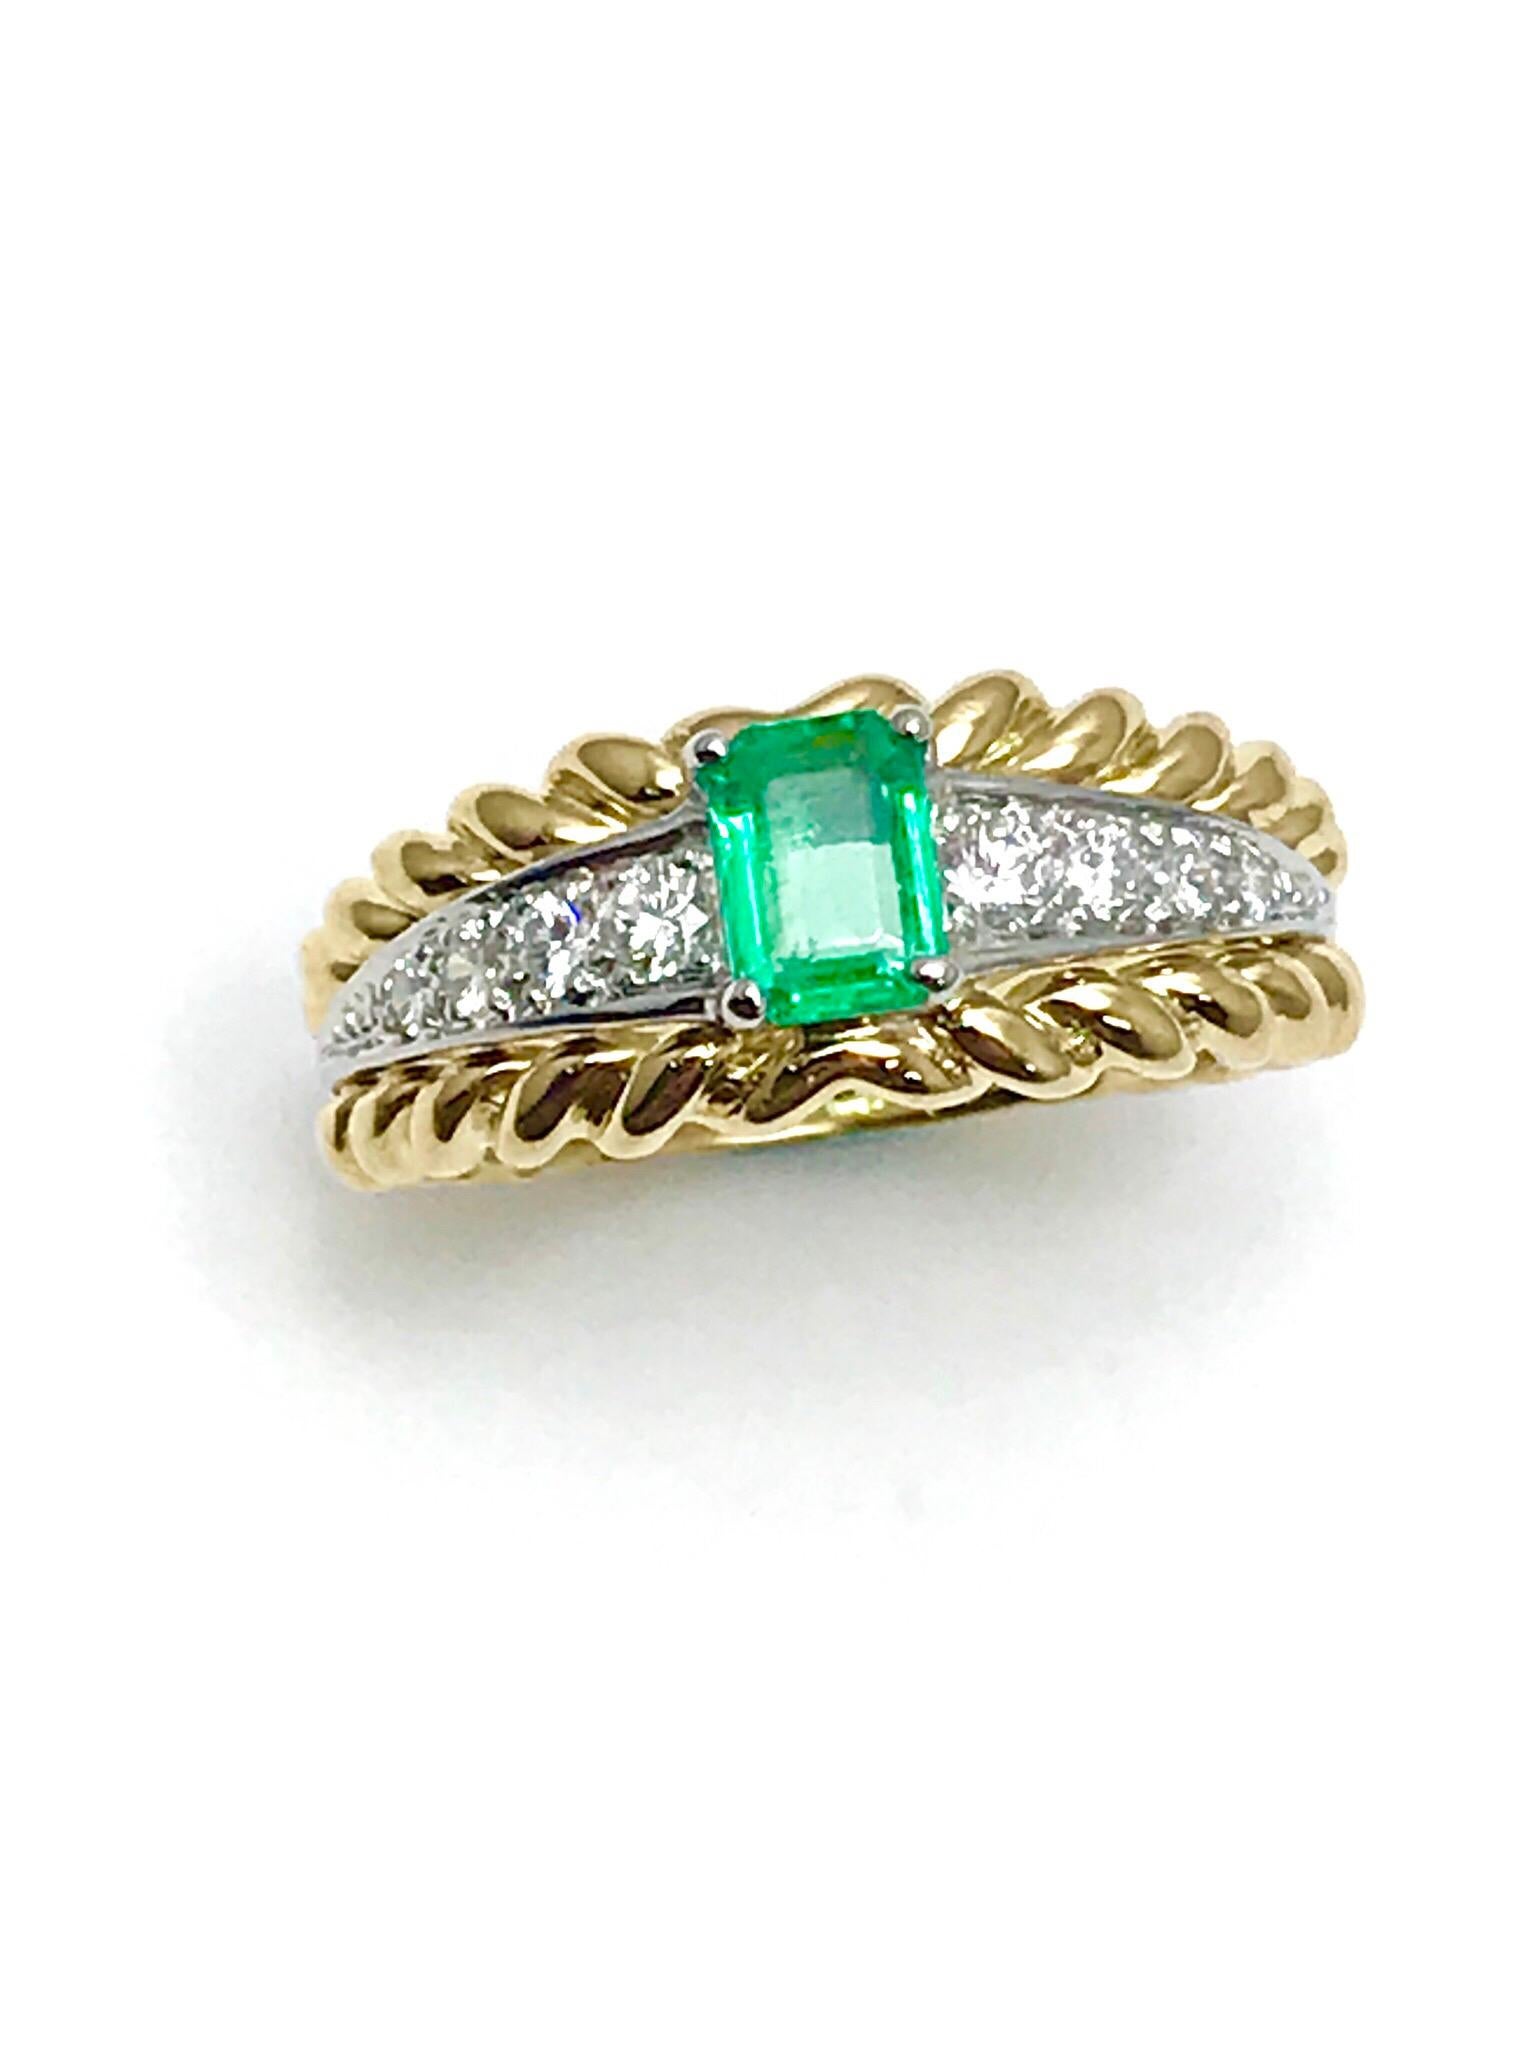 A gorgeous Van Cleef & Arpels Emerald and Diamond ring.  The .50 carat Emerald is prong set, with four diamonds to each side in platinum, between a braided gold frame, creating a split shank.  The Diamonds are round brilliant cut and have a total